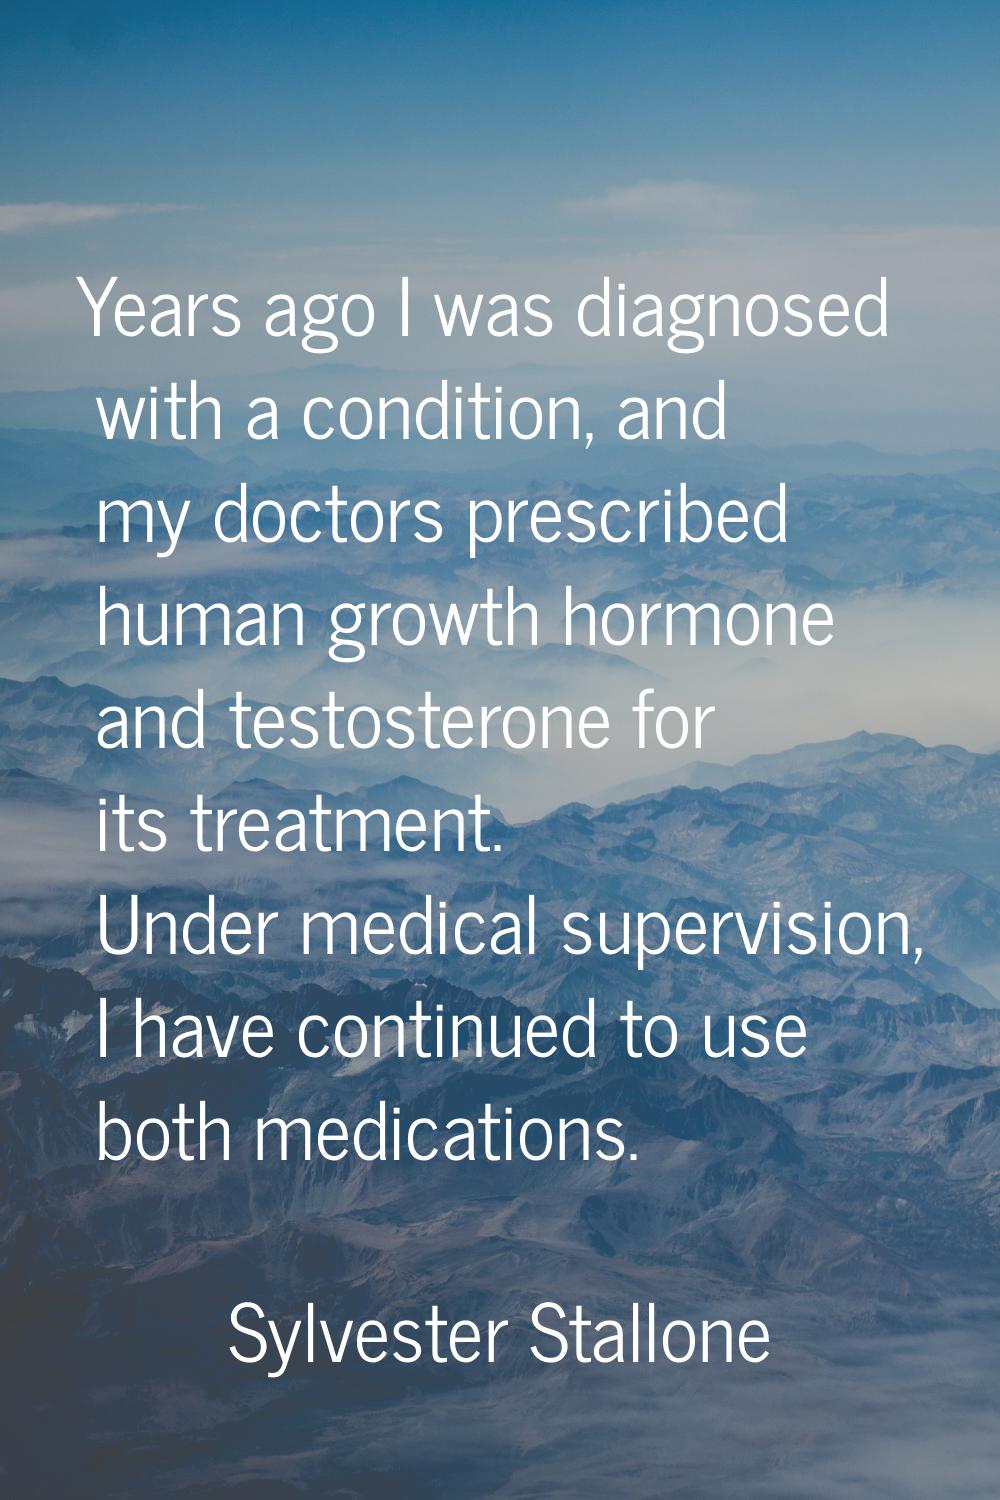 Years ago I was diagnosed with a condition, and my doctors prescribed human growth hormone and test